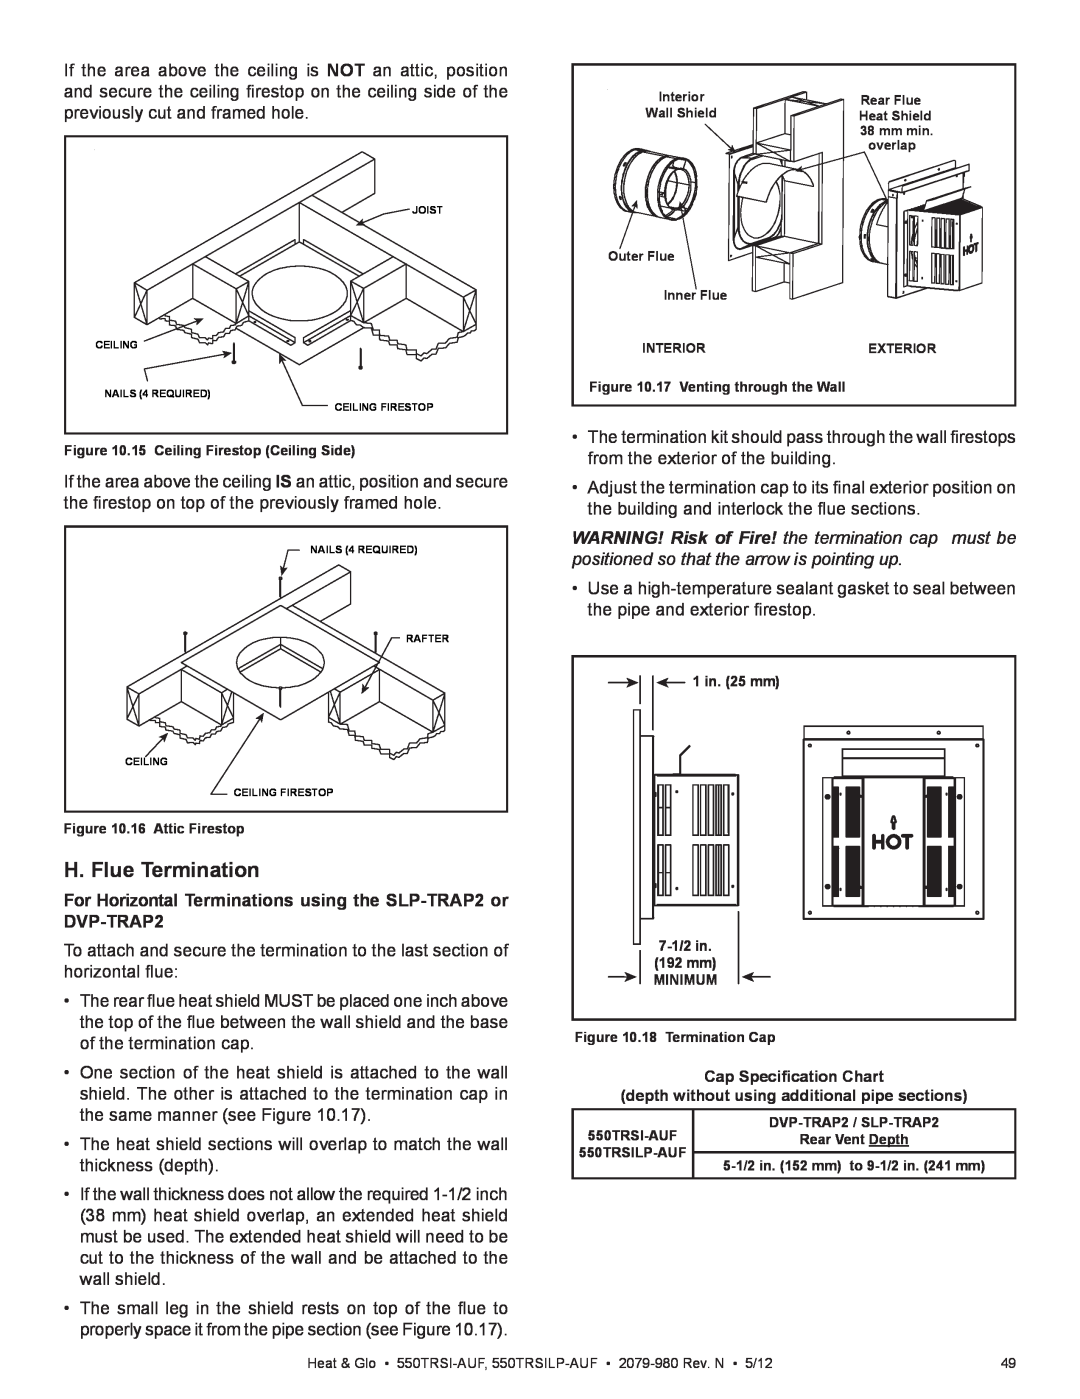 Heat & Glo LifeStyle 550TRSI-AUF owner manual H. Flue Termination, Cap Specification Chart 